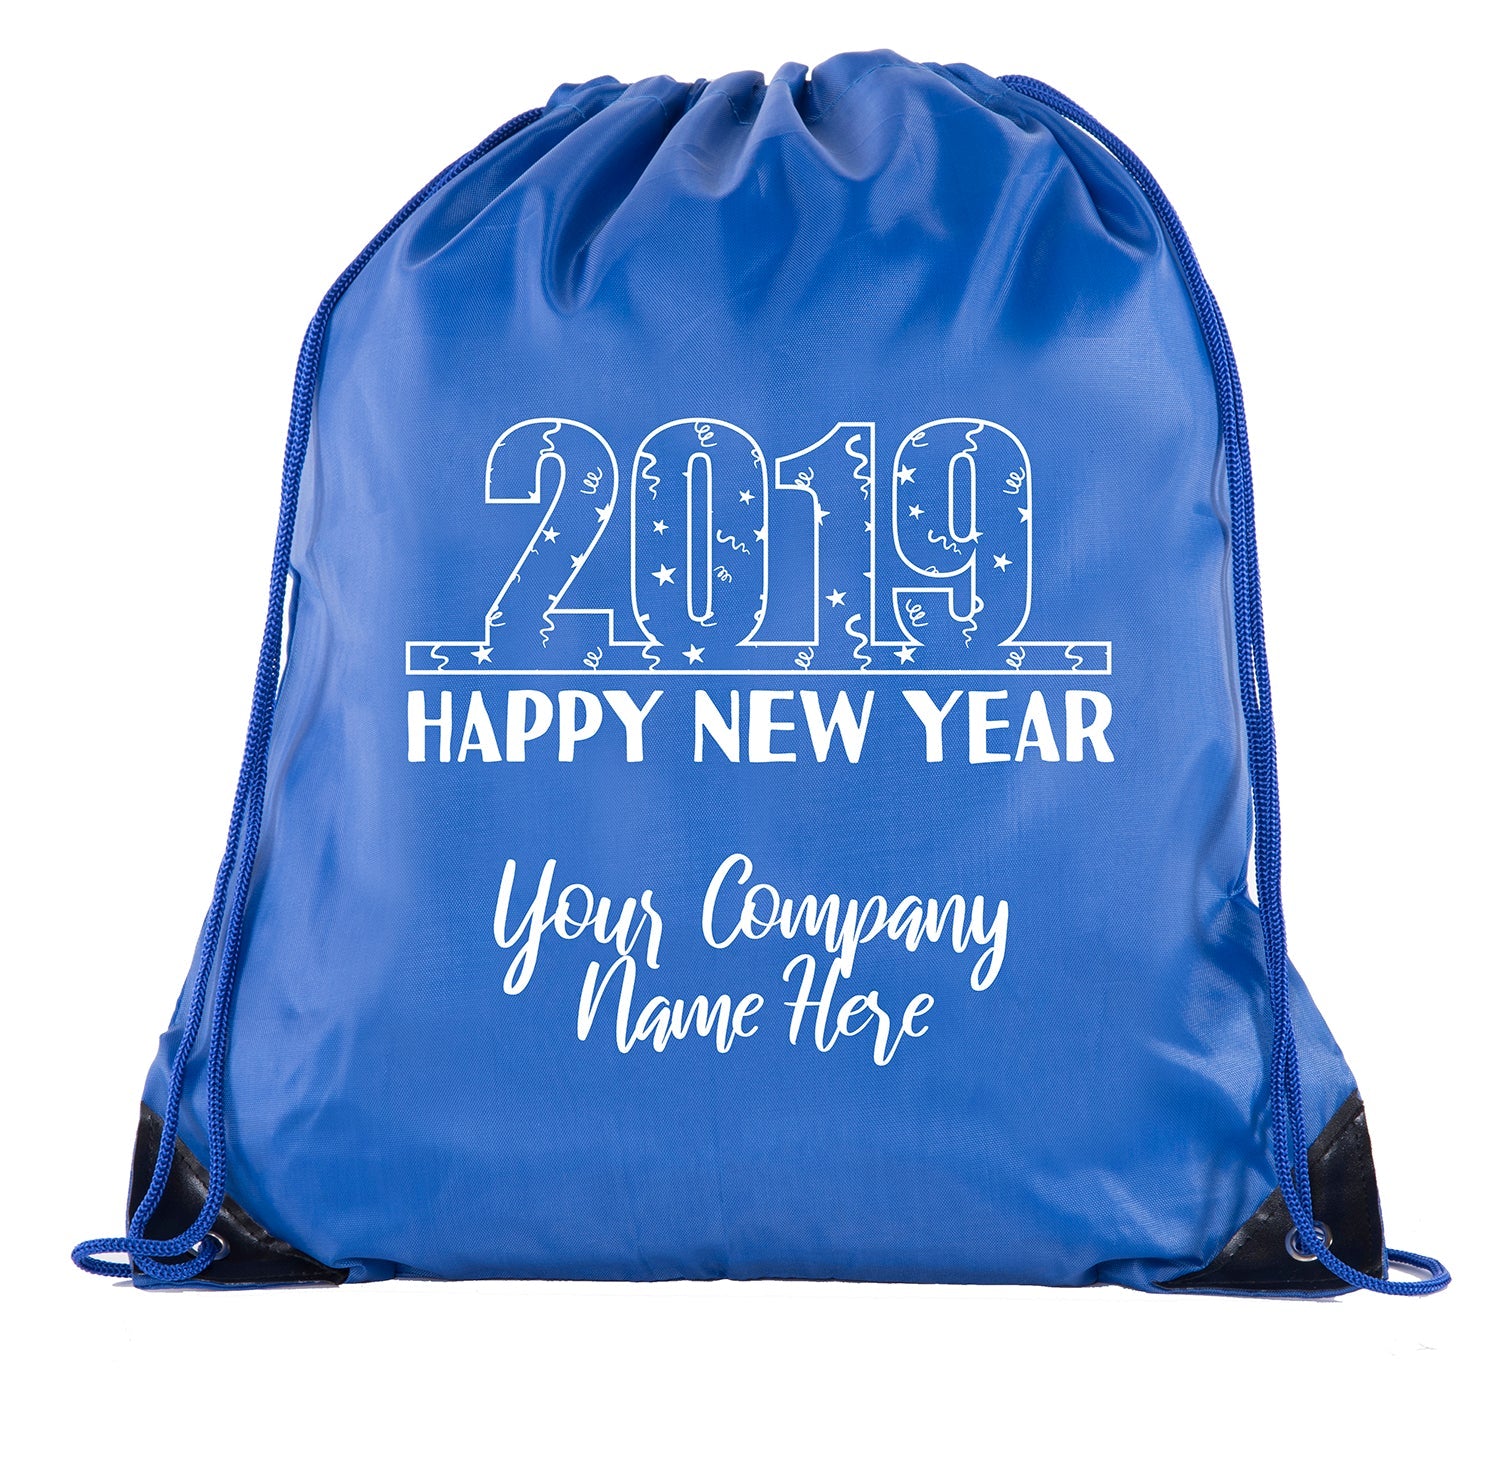 Accessory - New Year’s Eve Party Goody Bags, New Years Decorations, 2019 Gift Bags - Custom Company Name